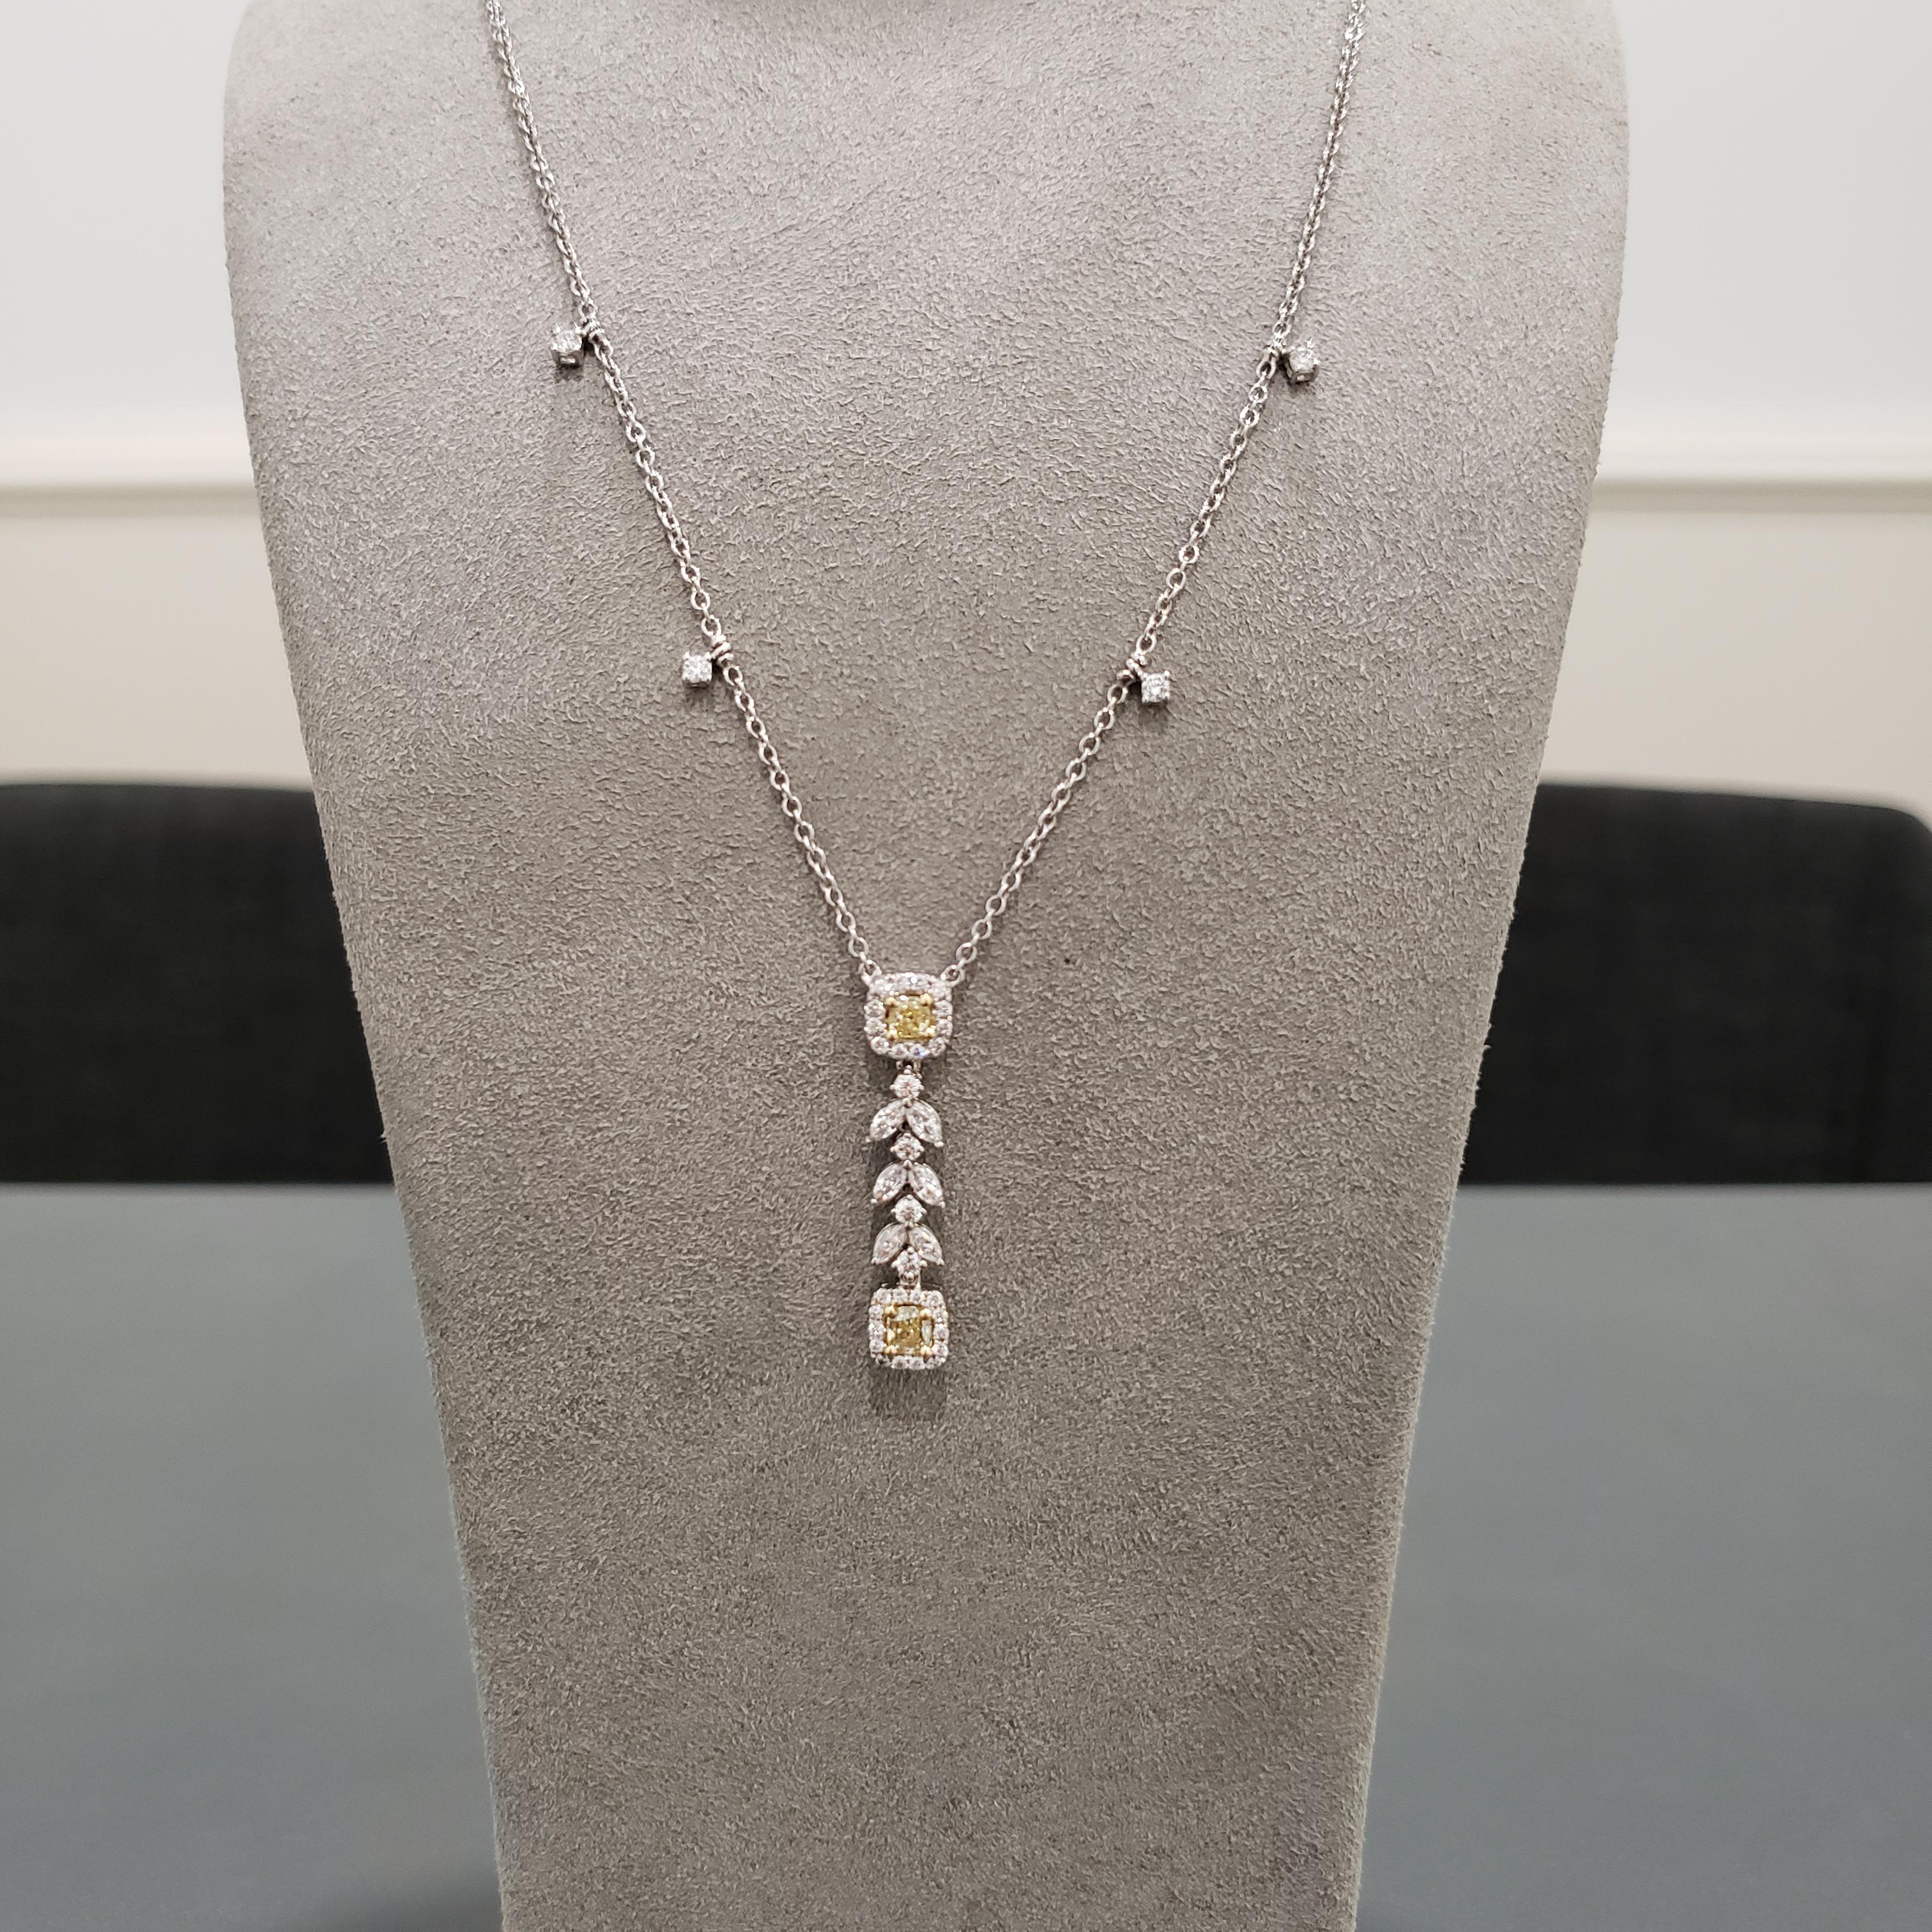 Simple and chic design that accentuates elegance. A gorgeous drop necklace showcasing 2 cushion cut yellow diamonds weighing 0.64 carats total gracefully set in a diamond halo surround. Each cushion diamond is spaced by brilliant marquise and round